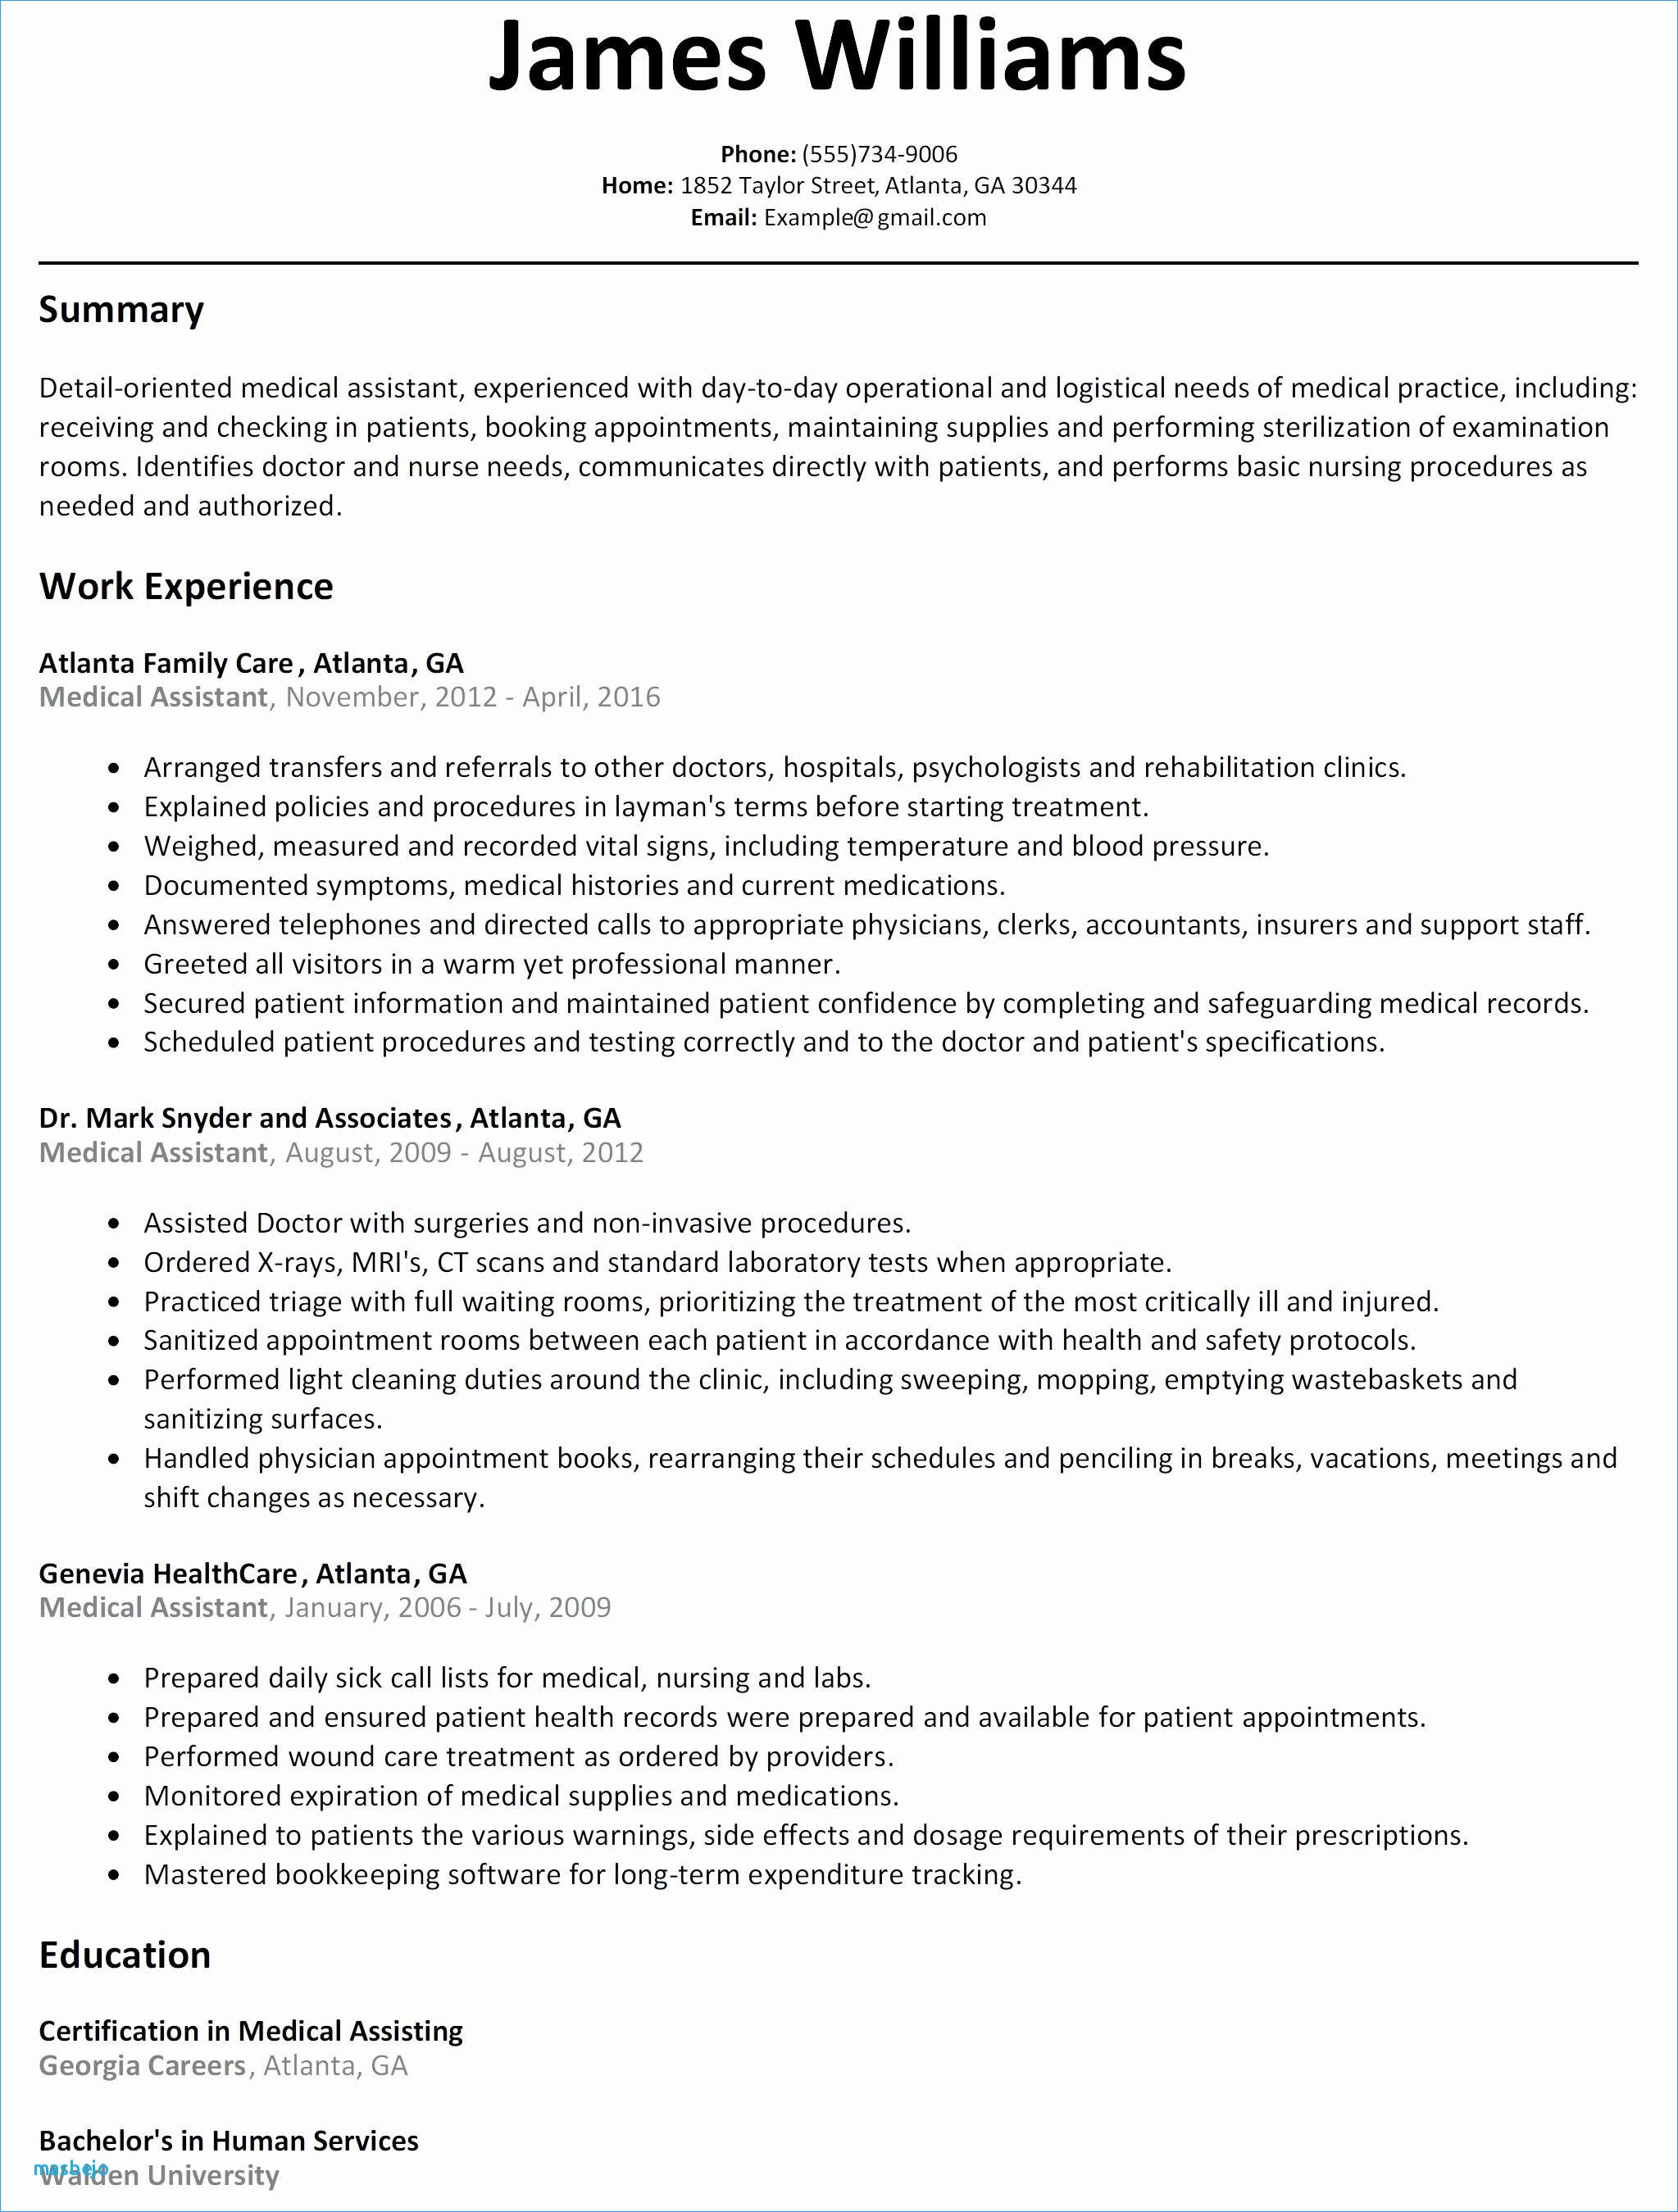 How Long Should A Resume Be Best Resumes 2016 Unique 70 How Many Pages Should A Resume Be 2016 Of Best Resumes 2016 how long should a resume be|wikiresume.com